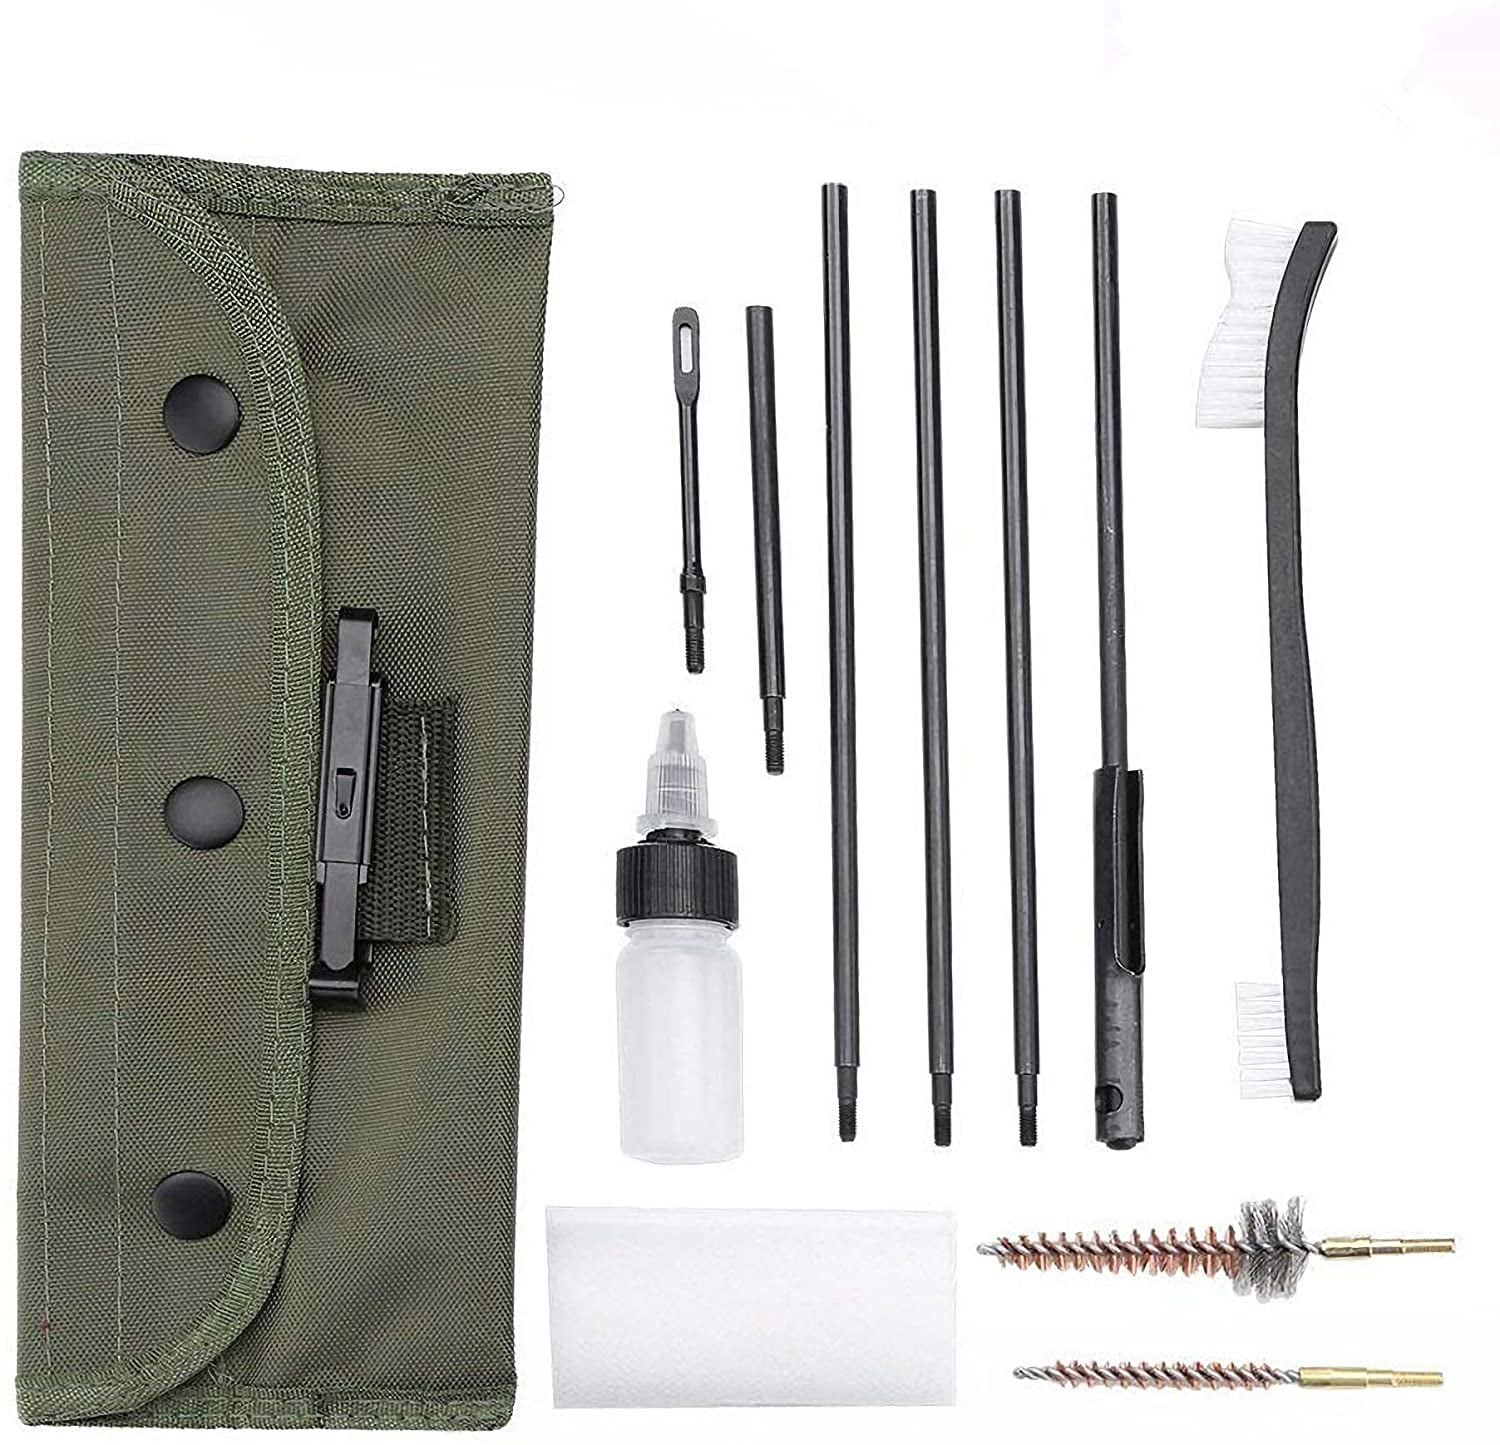 .22 22LR .223 556 Rifle Gun Cleaning Kit Brush Cleaner Military Clean Tools 